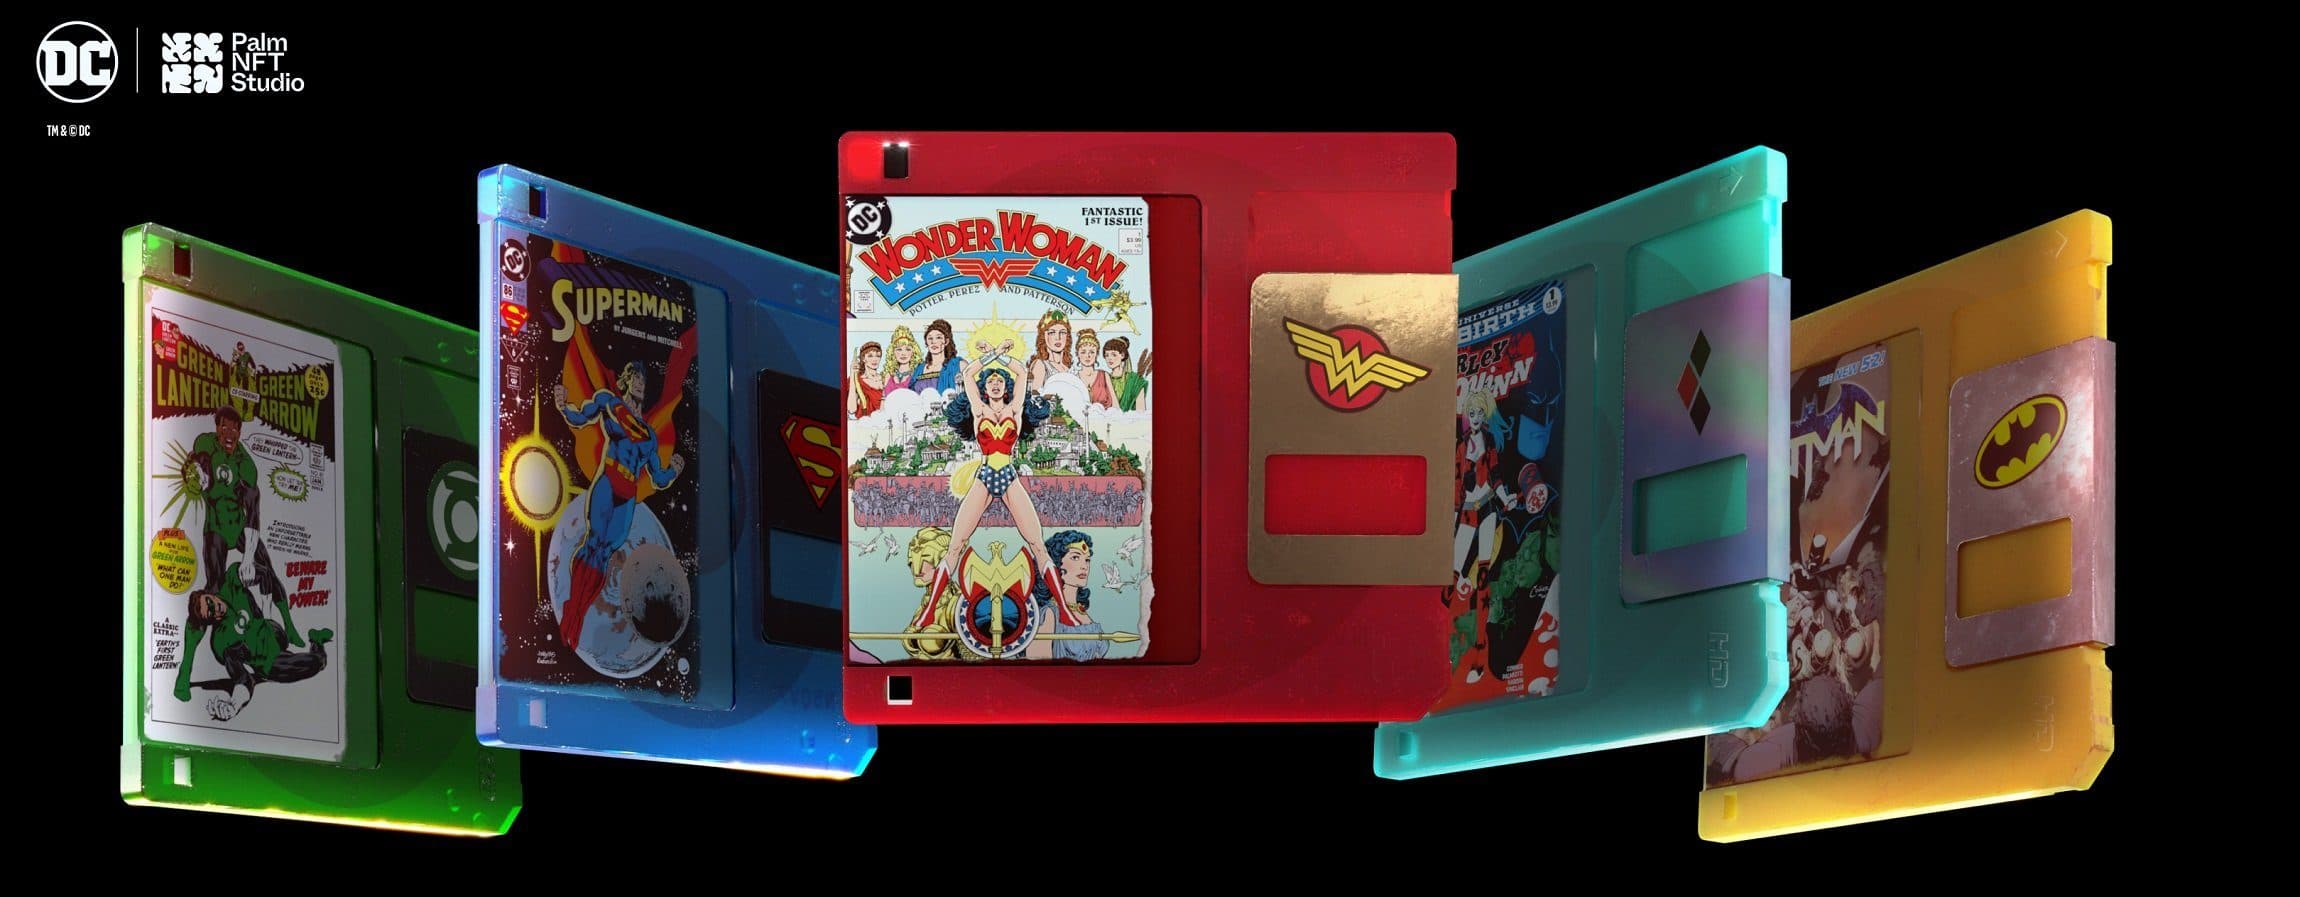 Image featuring five DC Comics NFTs from its debut collection